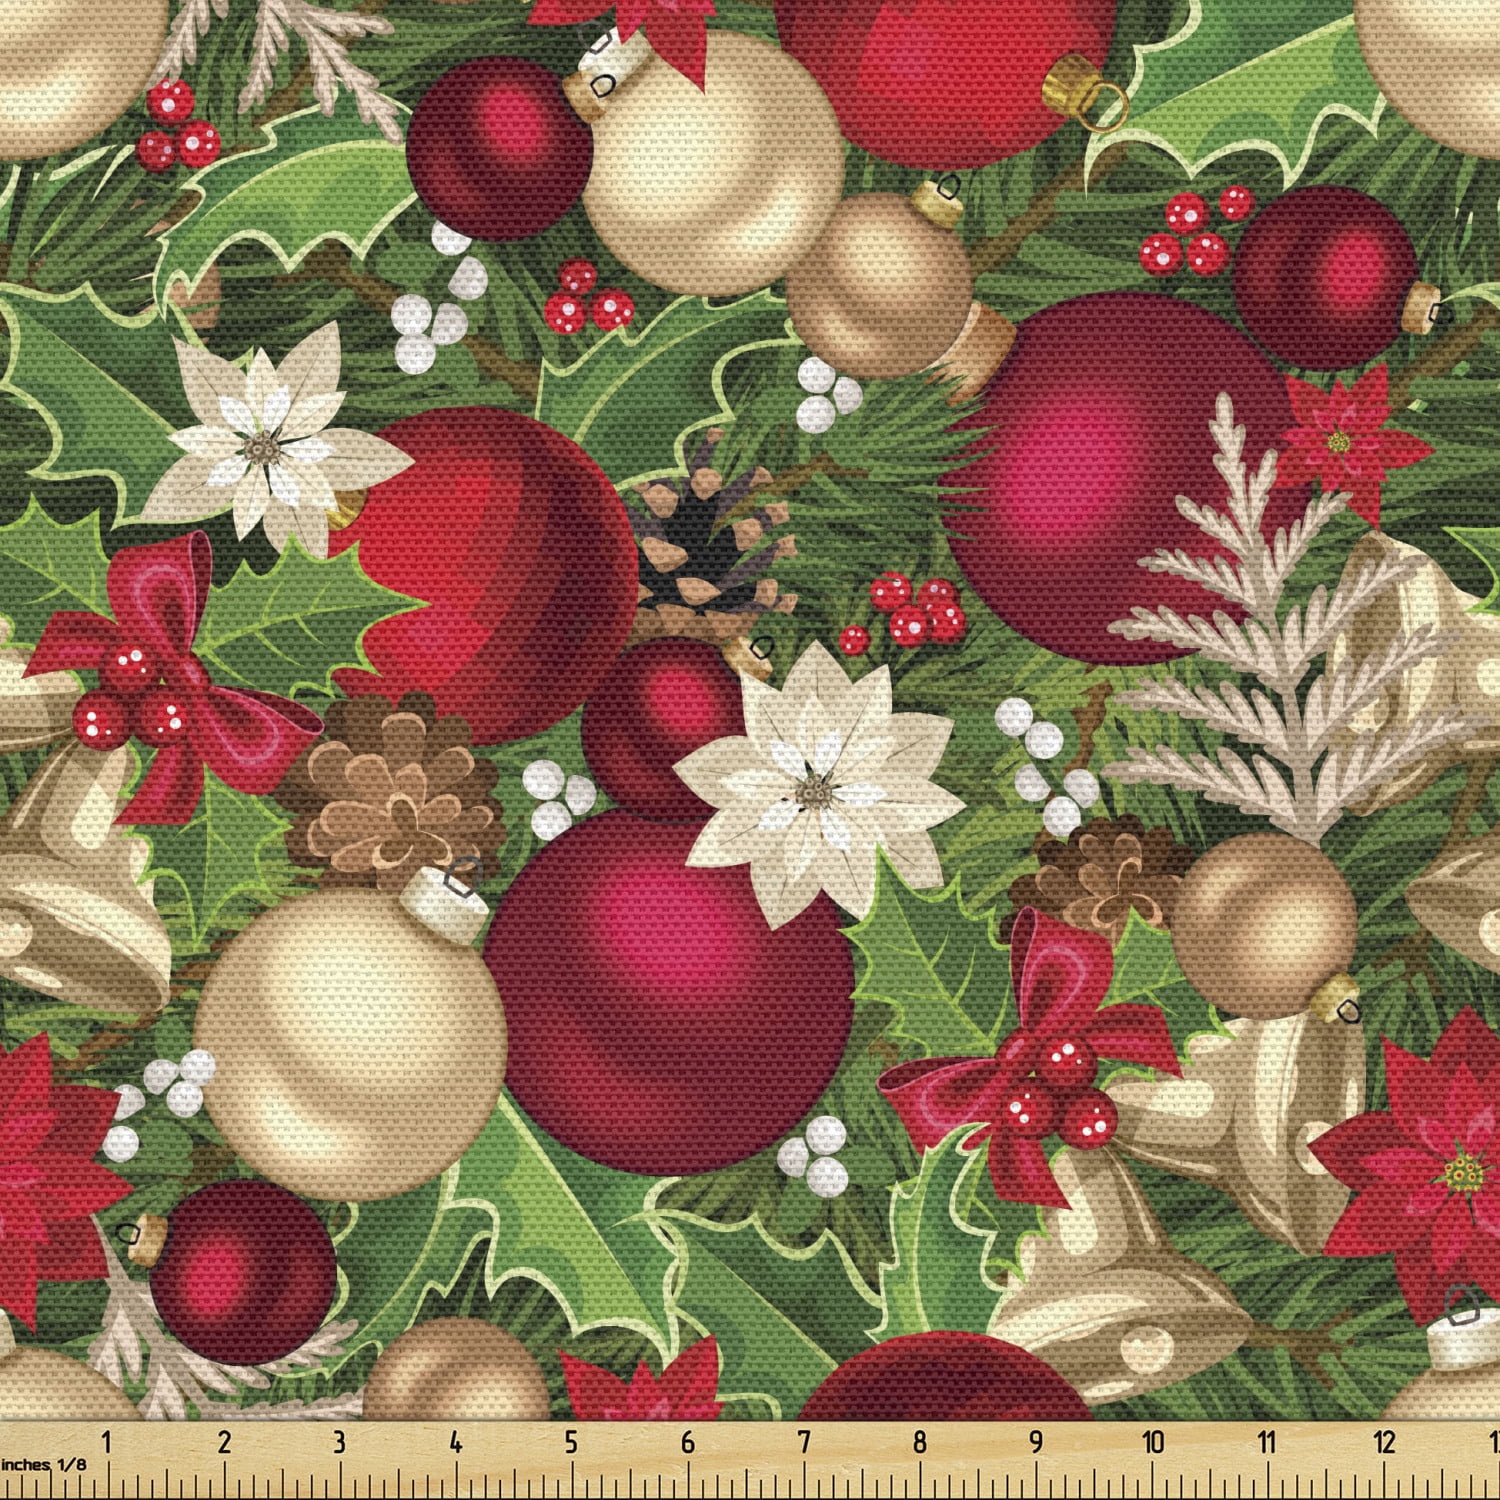 100% cotton quilting fabric by the yard Christmas fabric Red poinsettias on charcoal gray